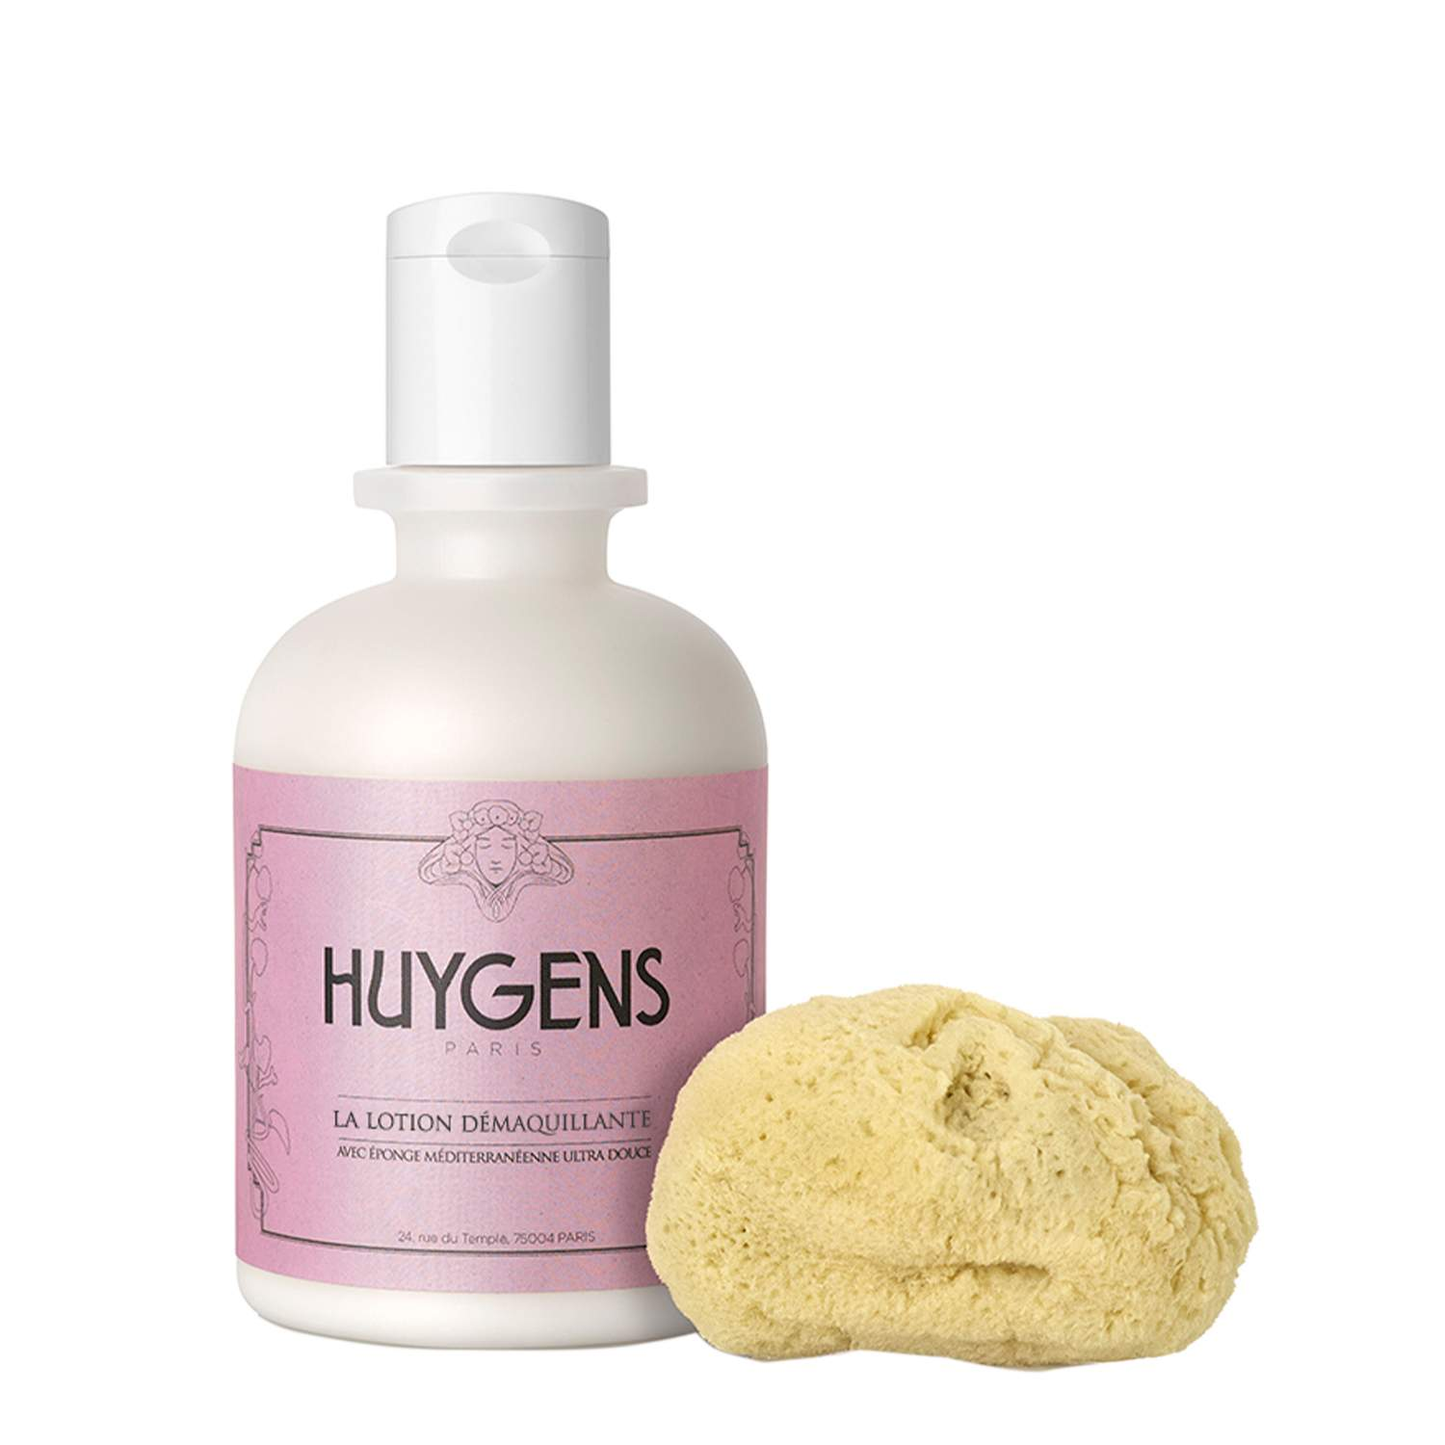 Huygens Cleansing Lotion With Sea Sponge